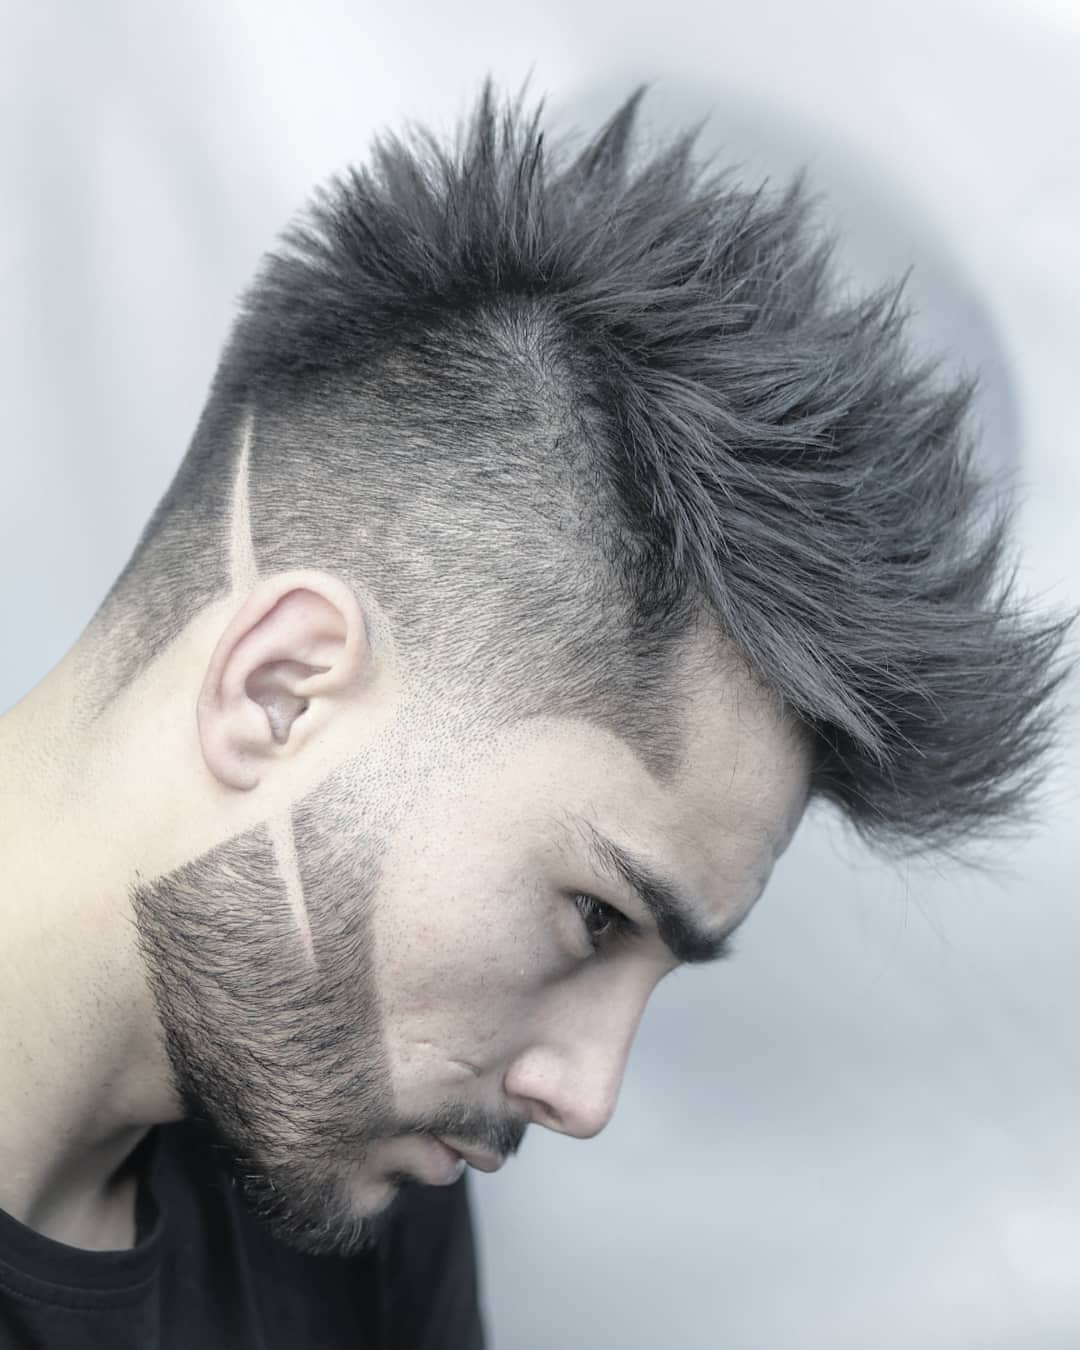 Hairstyle for Men 142 best haircut for men | haircut for men | haircuts for men Haircut for Men